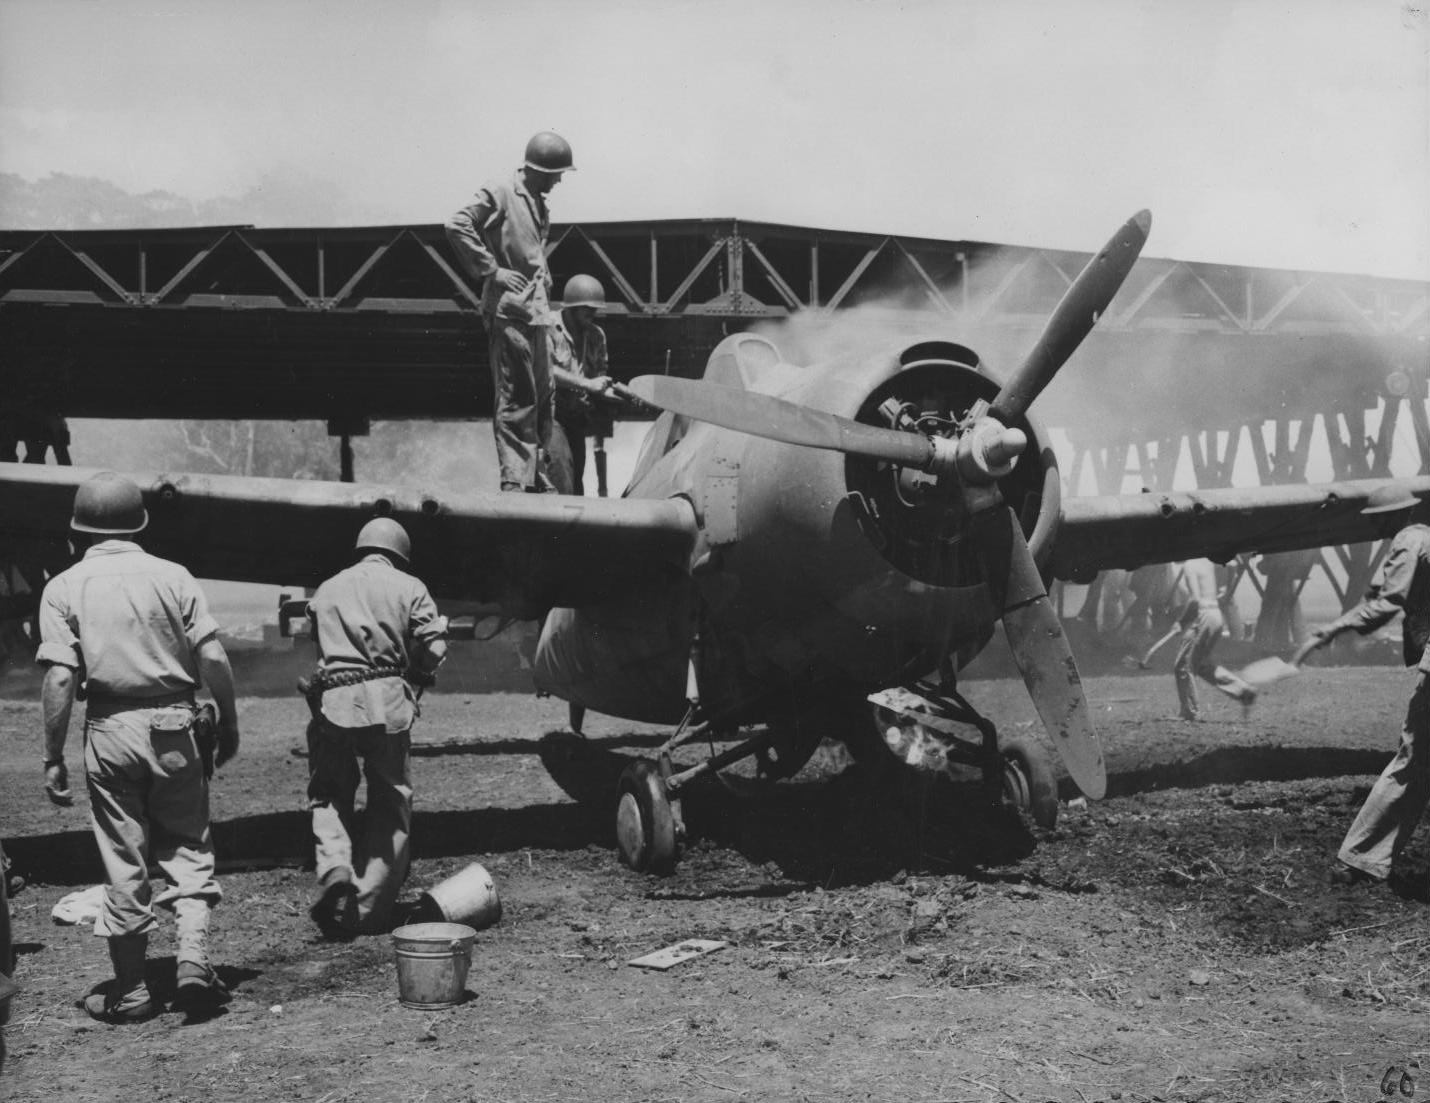 US Marine ground crew putting out a fire on a Wildcat fighter, Henderson Field, Guadalcanal, Solomon Islands, 1942